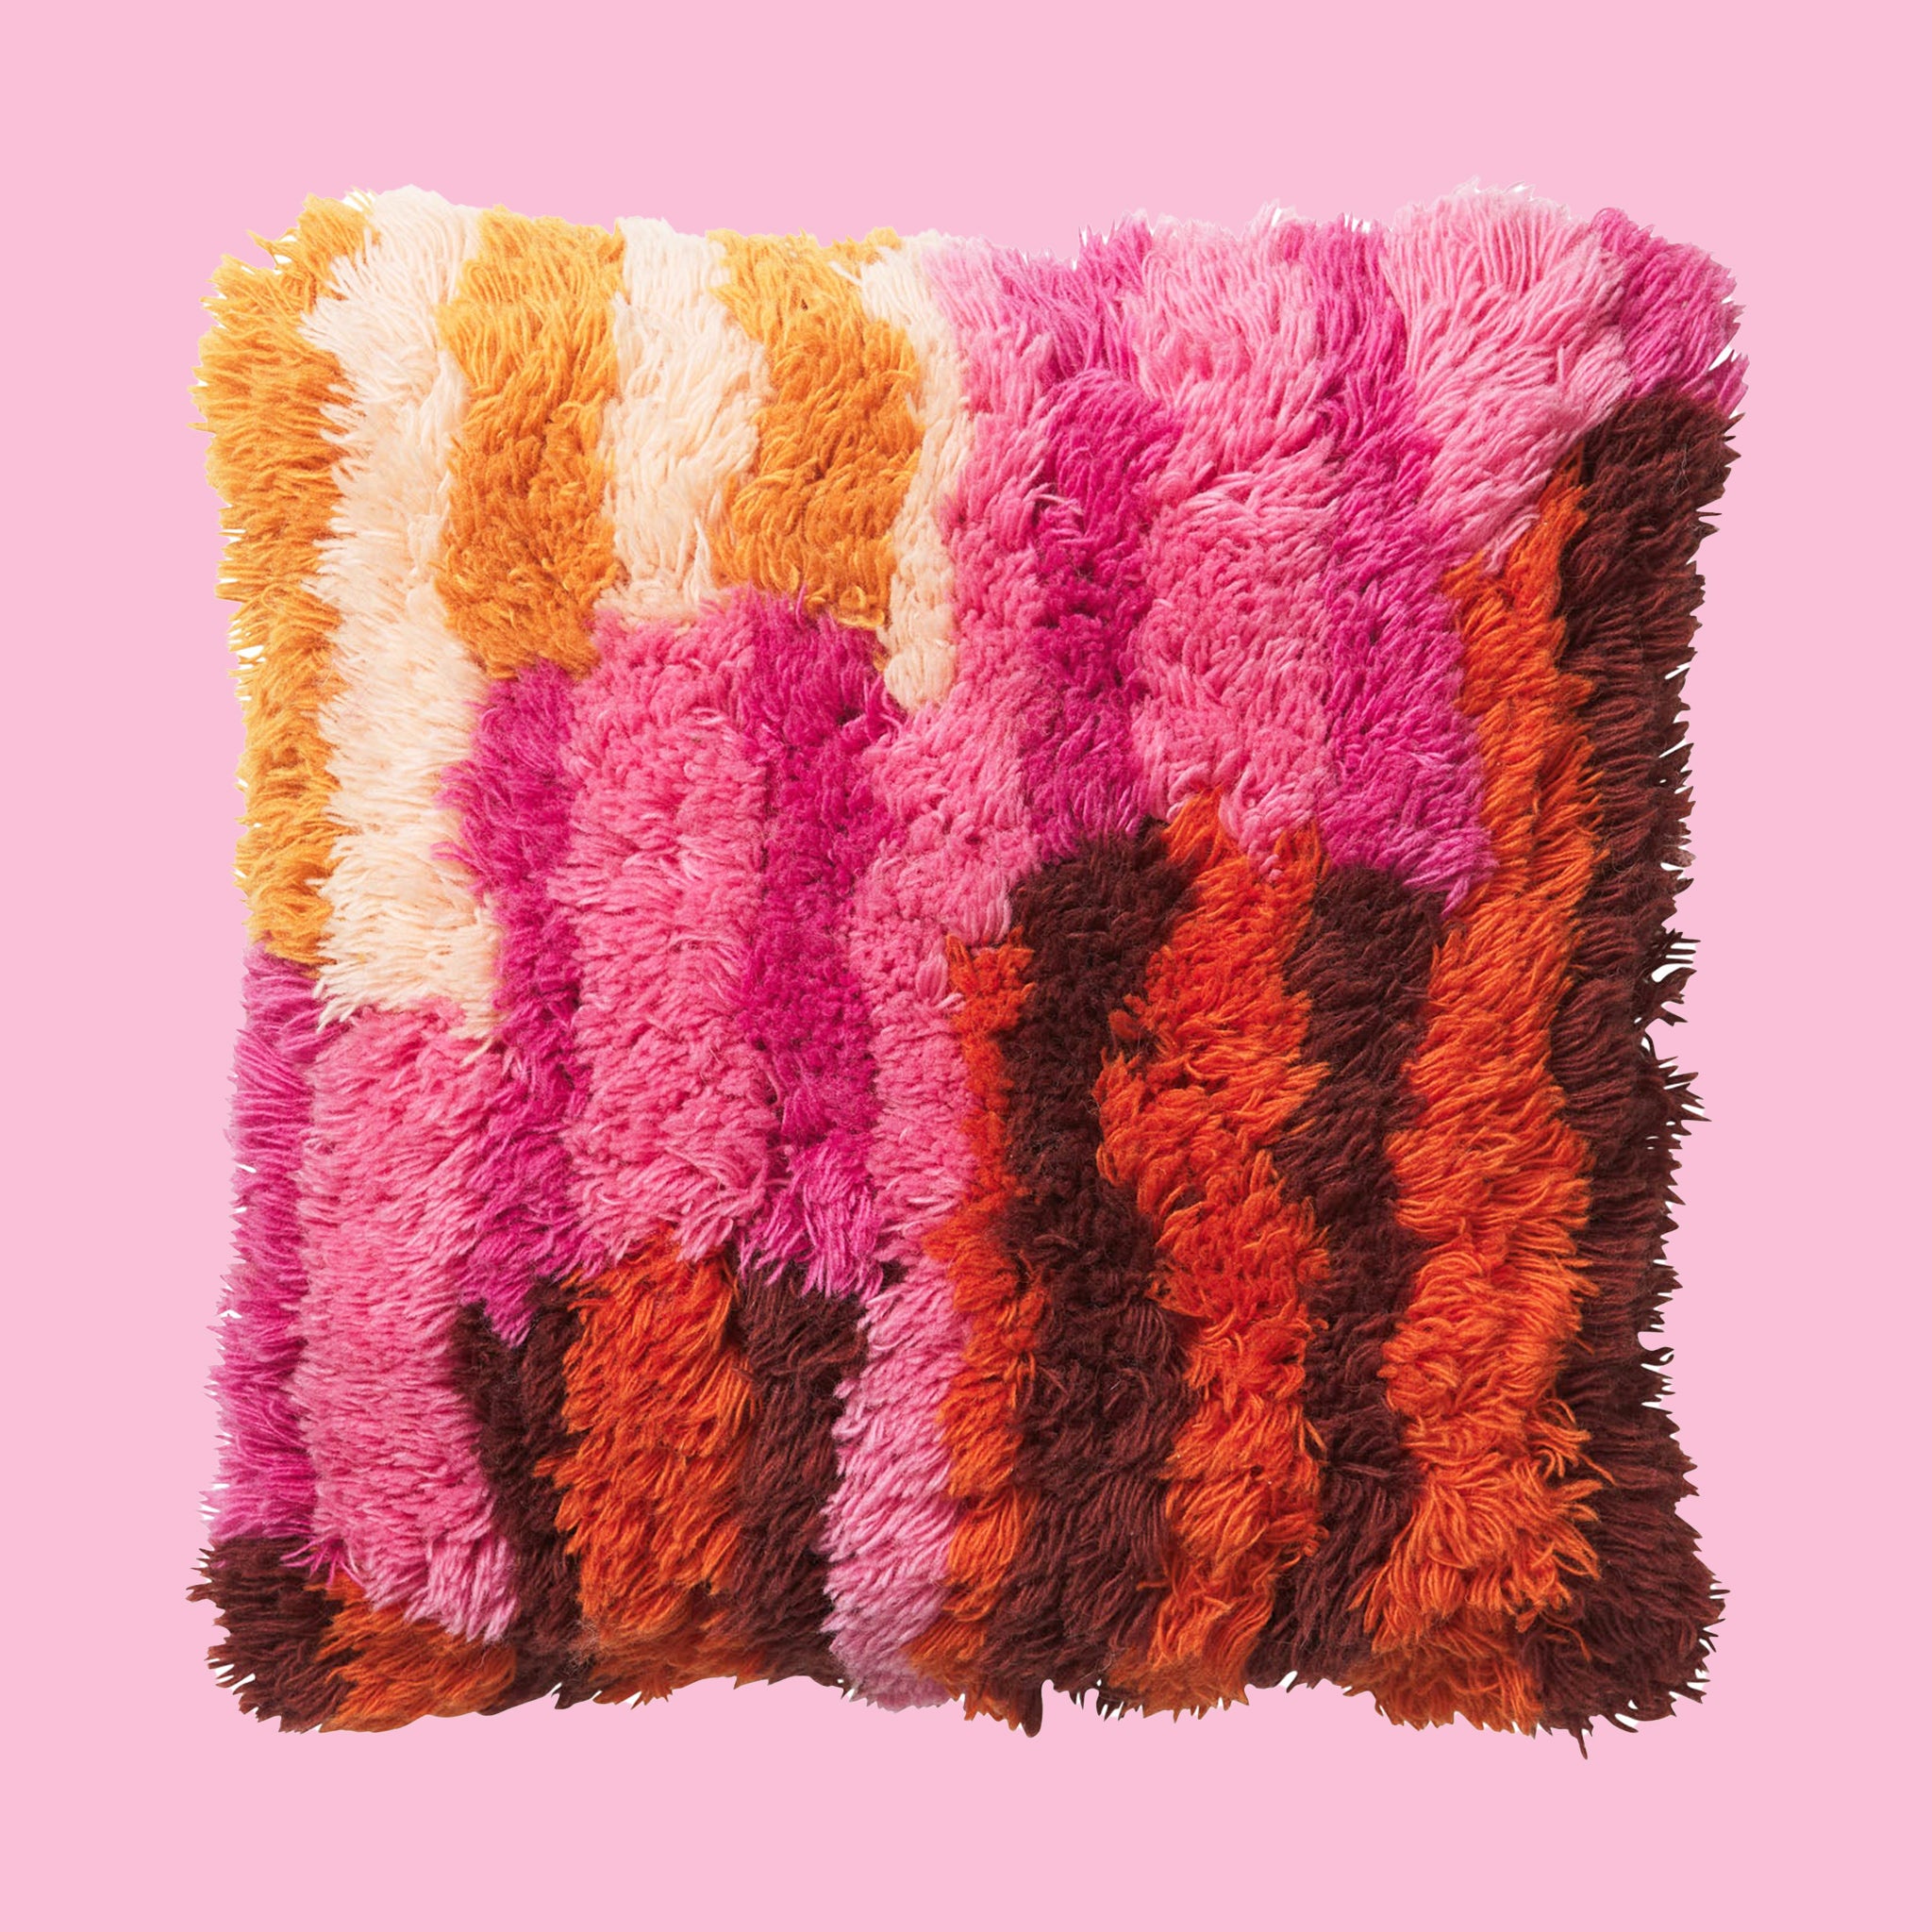 On a pink background is a multi colored shag pillow in orange, brown, pink and yellow shades. 